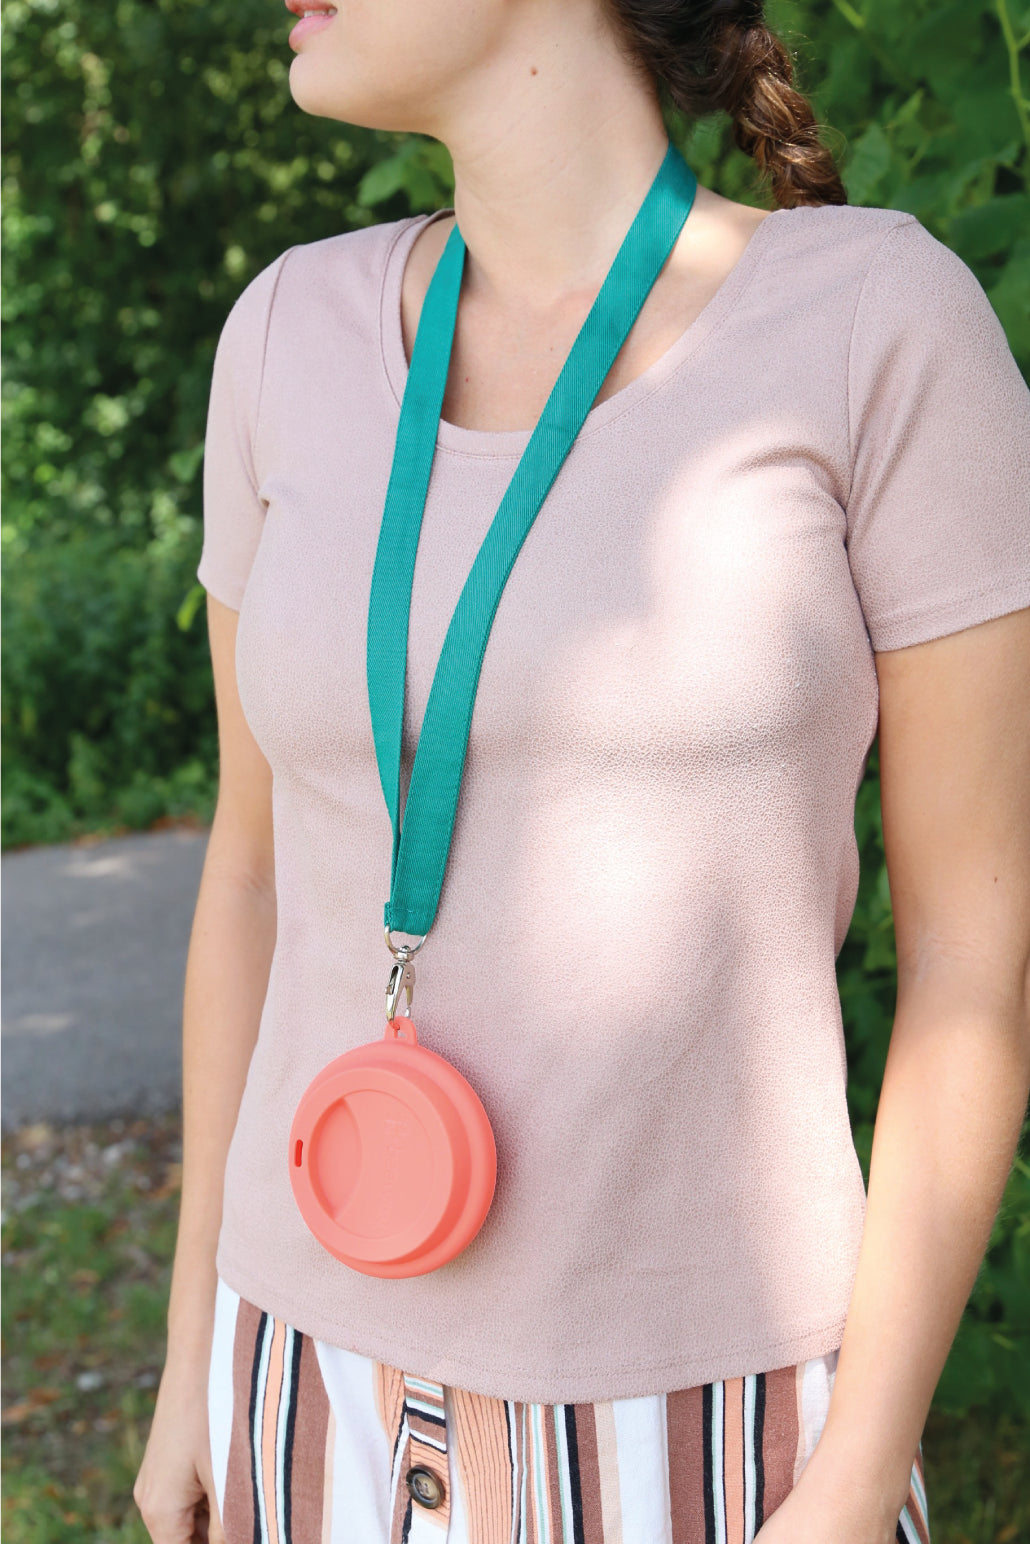 cup holder necklace being showed with a reusable silicone cup on neck of a woman